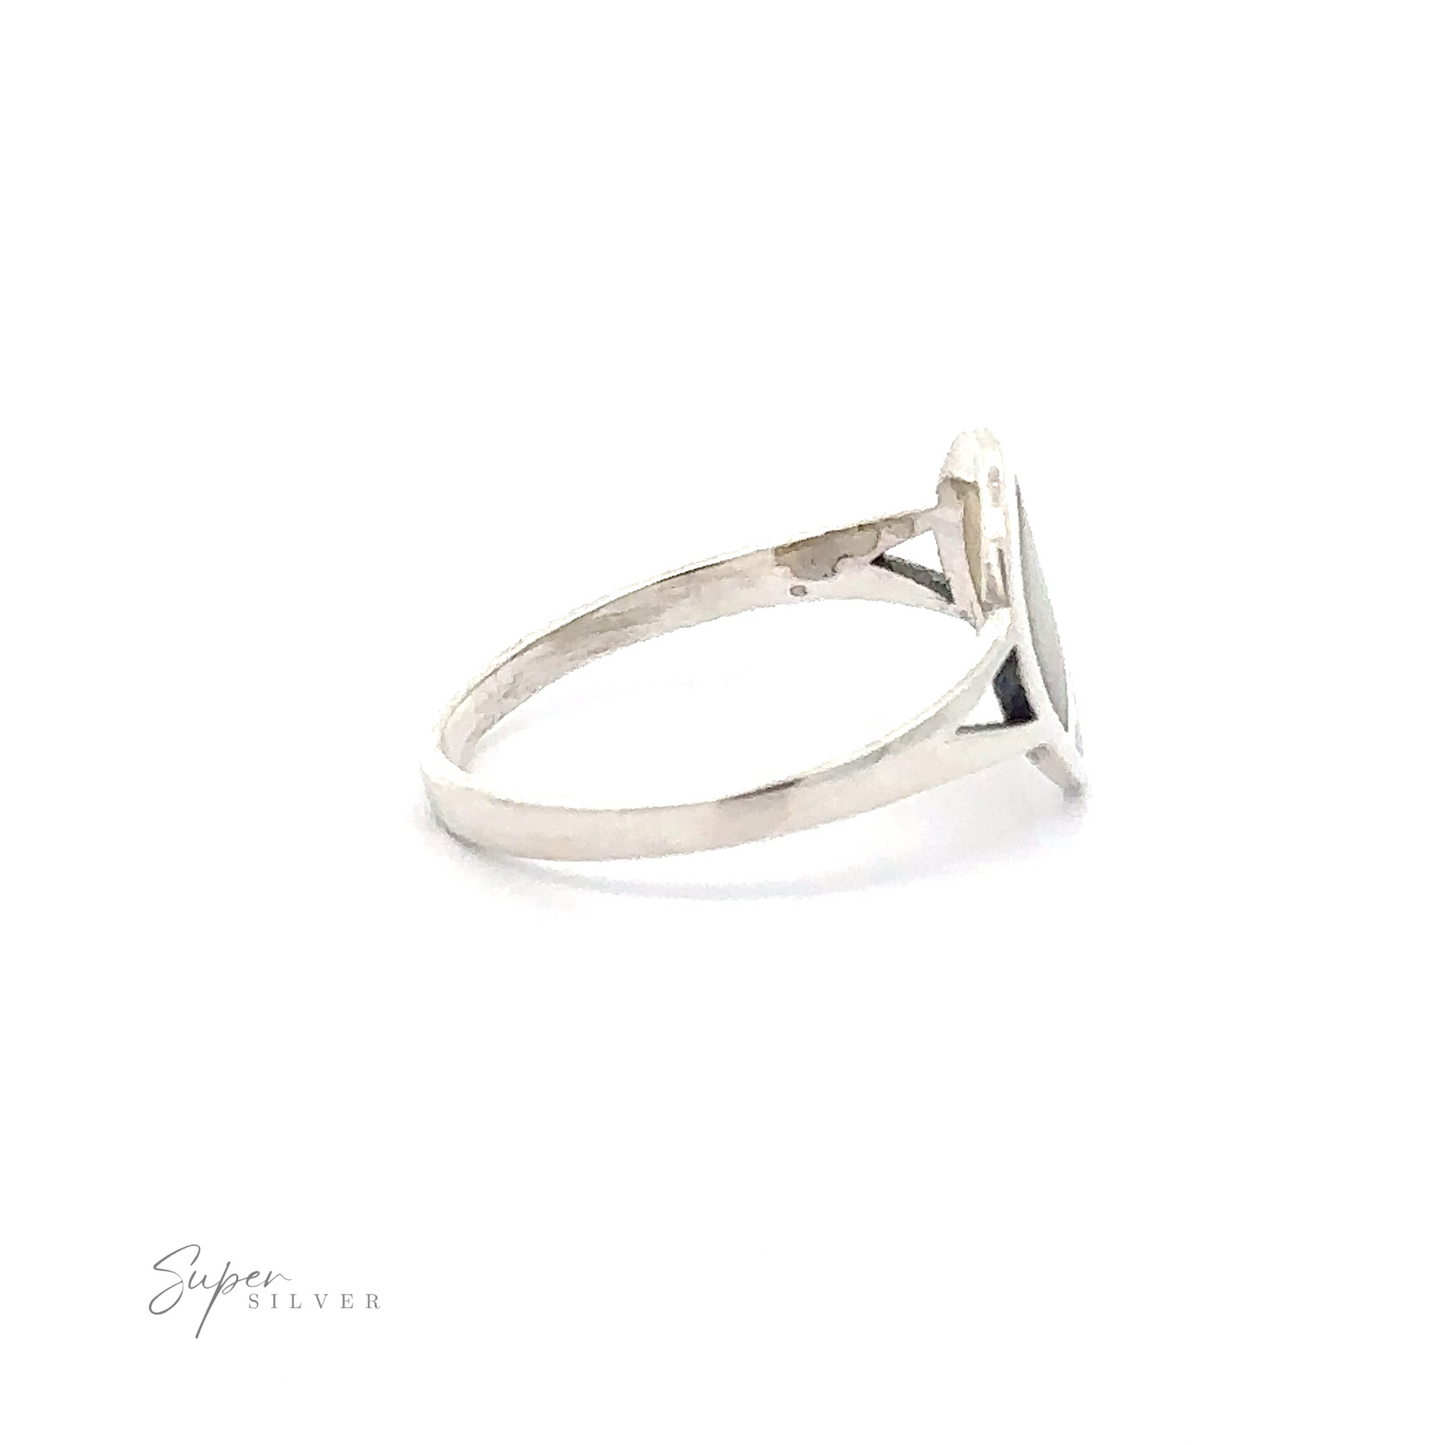 
                  
                    A Stone Inlay Peace Sign Ring with a simple band and an empty setting, viewed from the side against a white background. The words "Super Silver" are visible in the bottom left corner.
                  
                